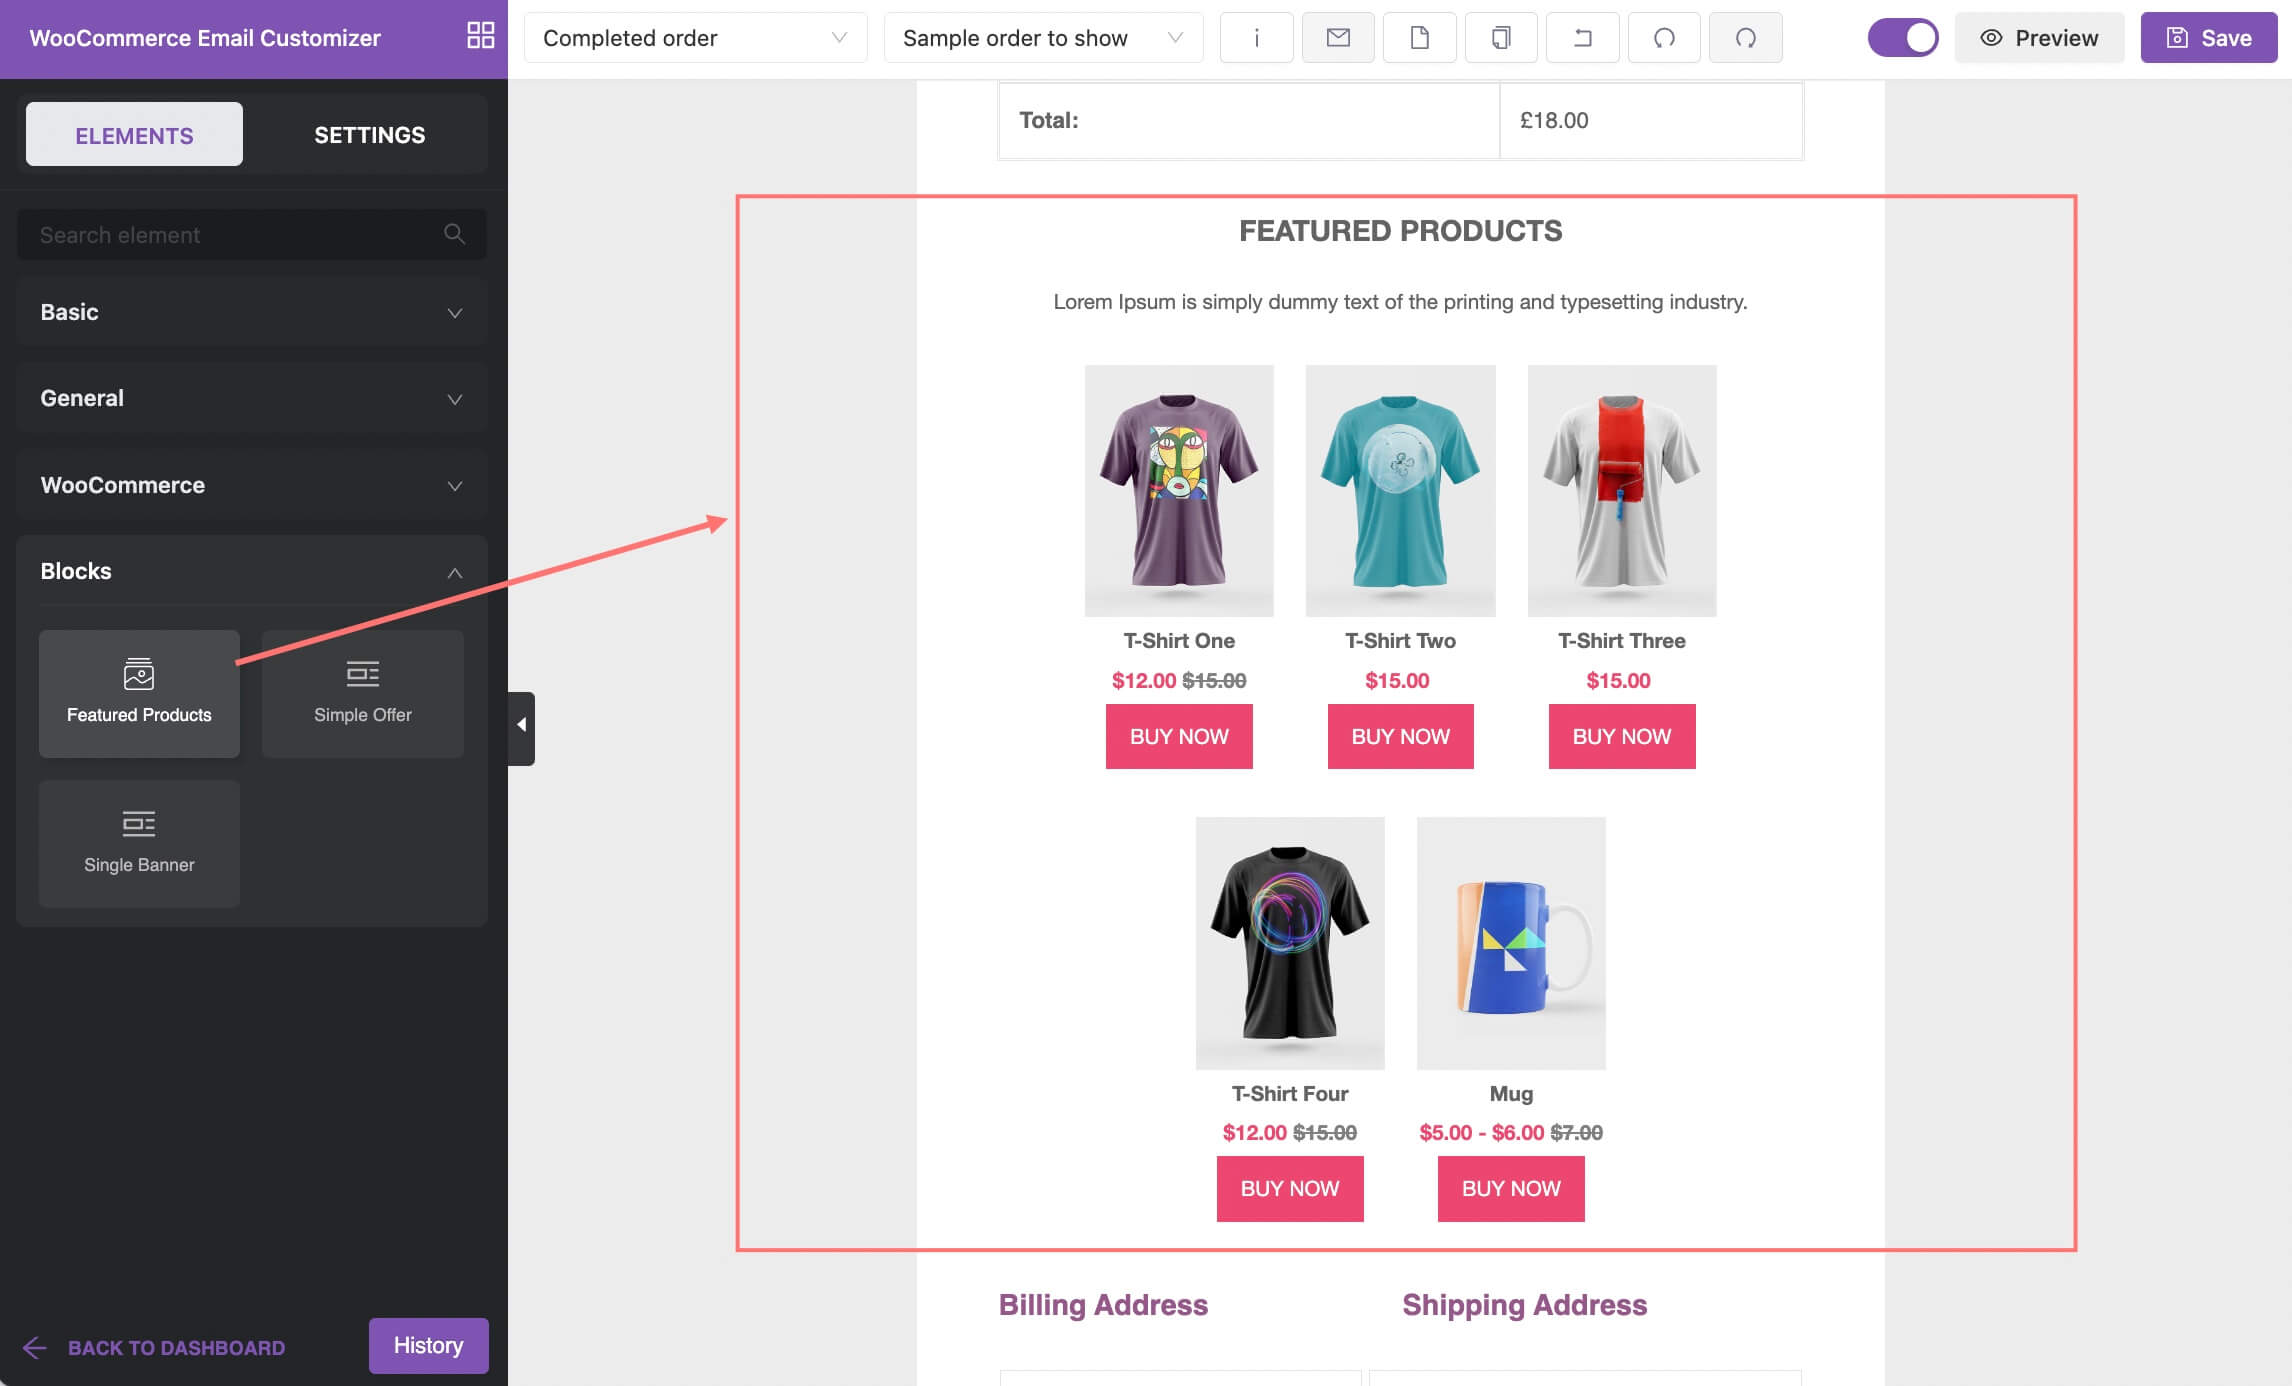 Featured products dynamic block in YayMail editor